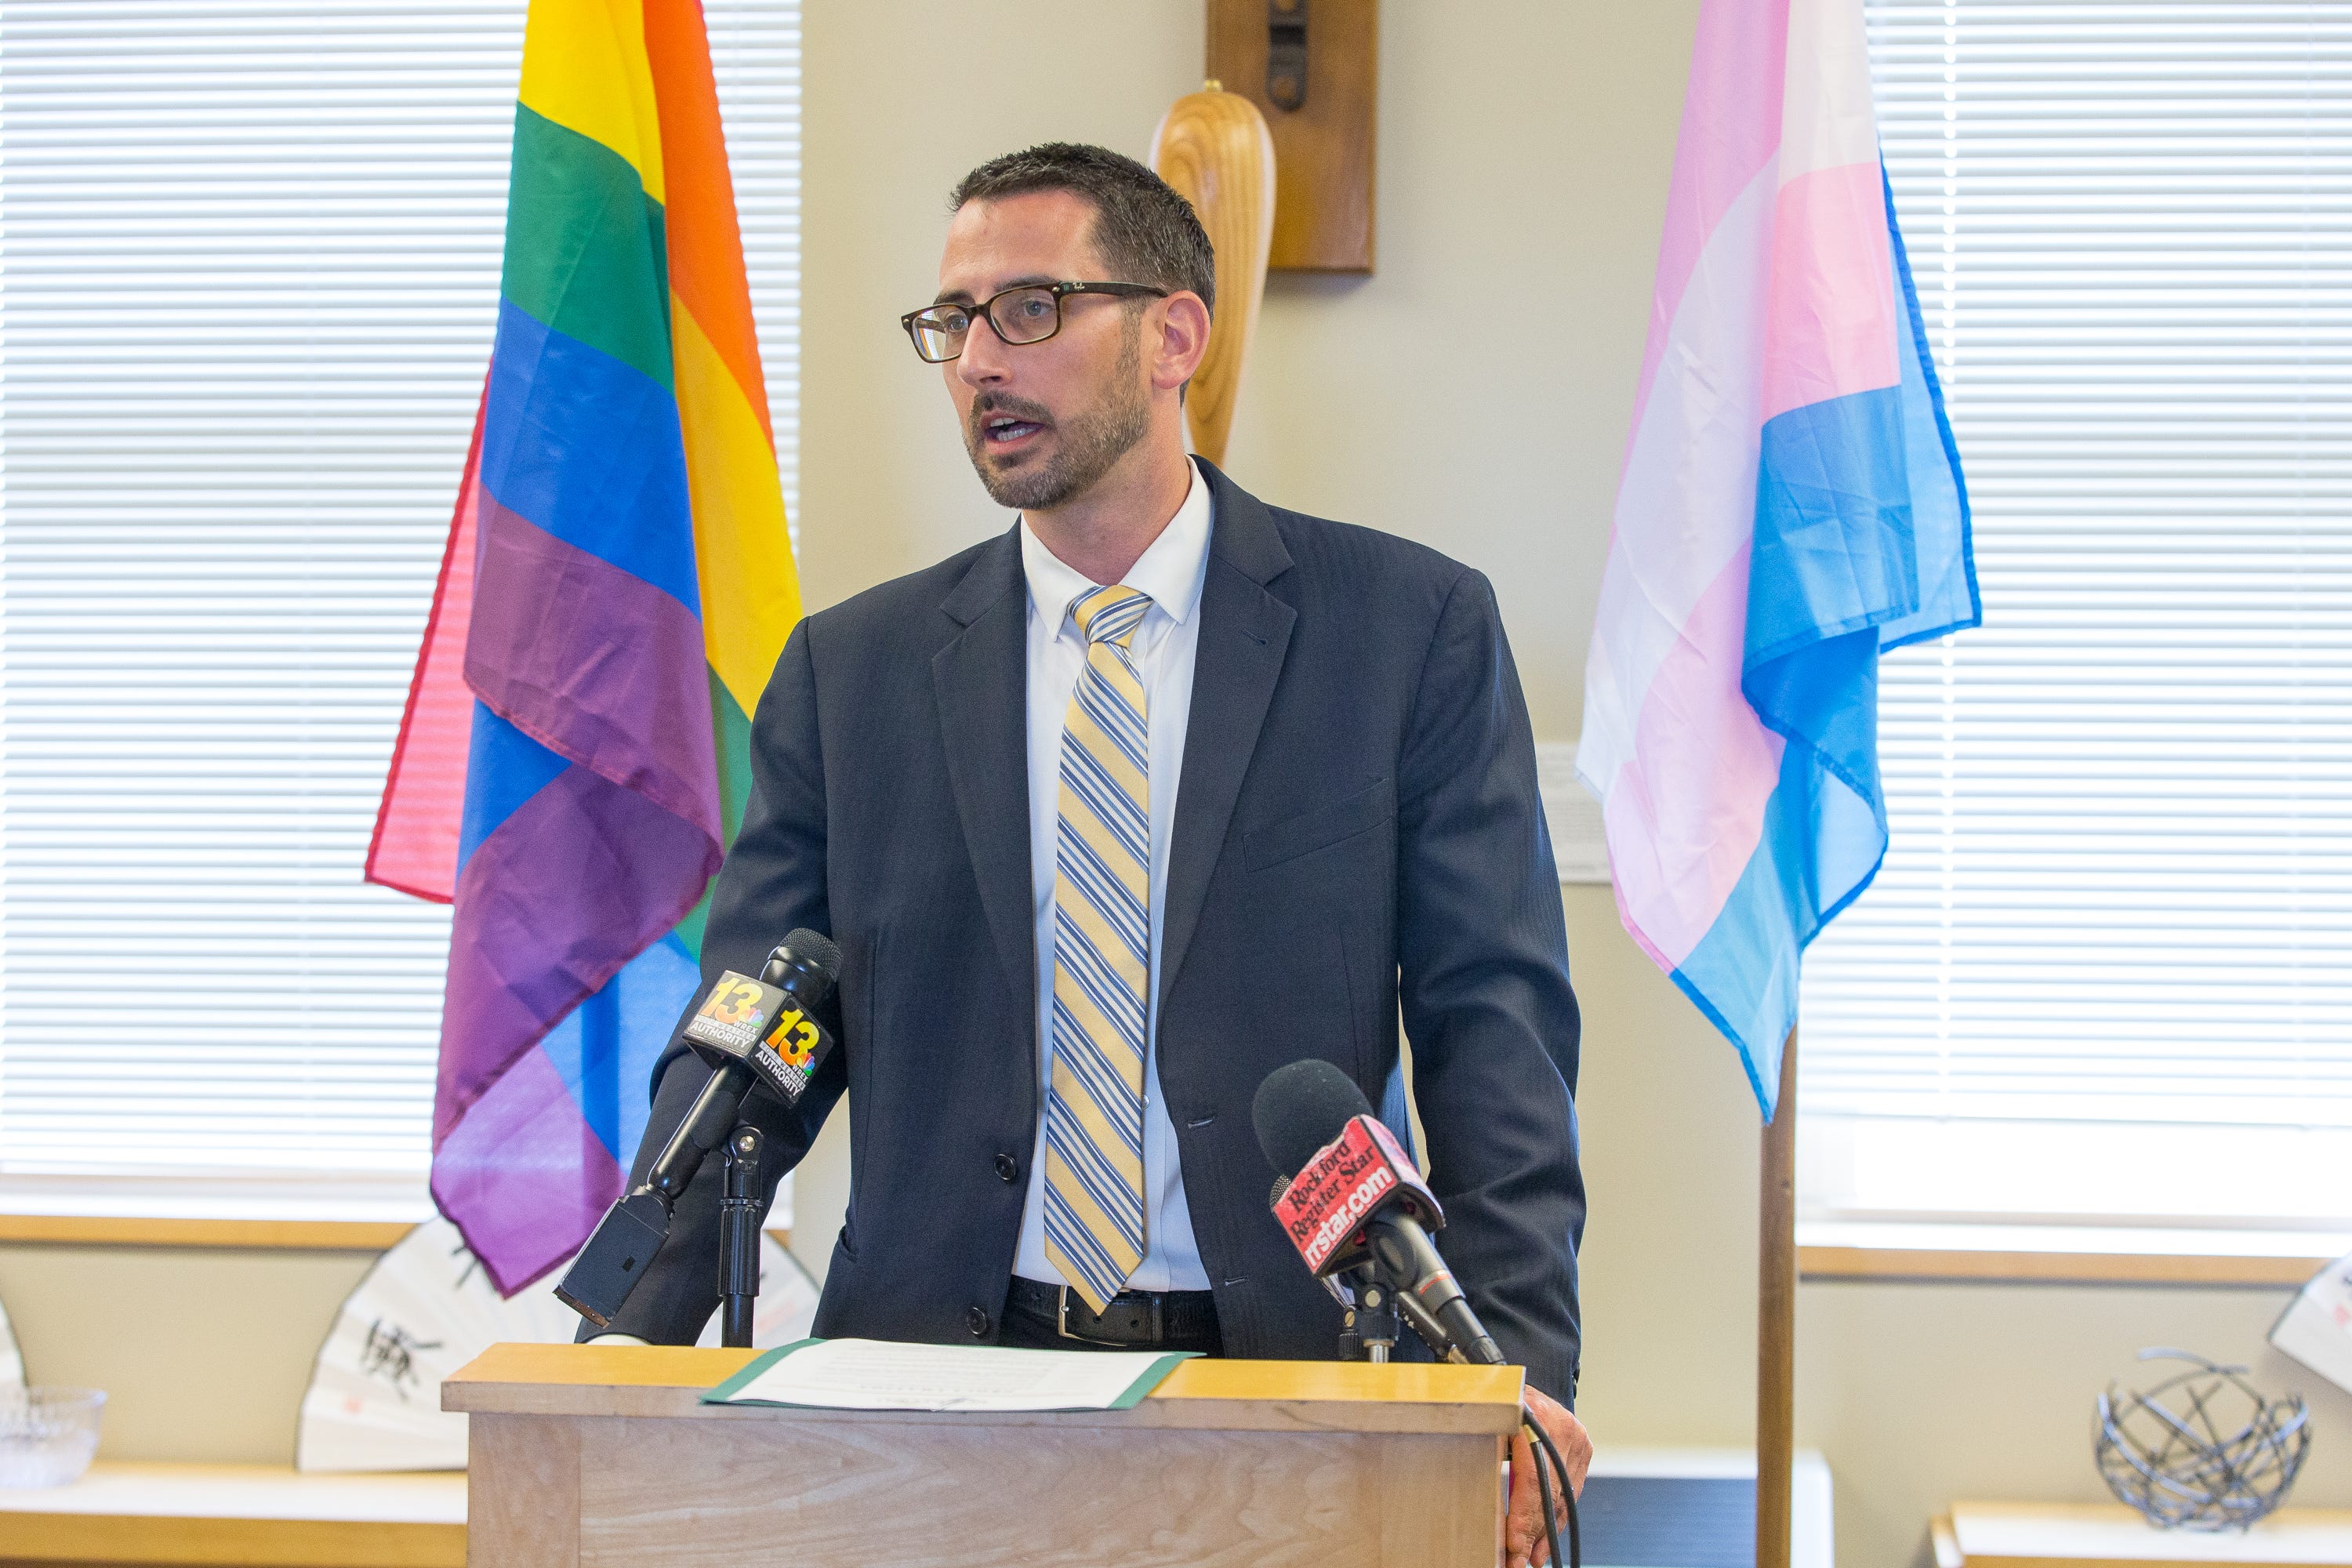 Rockford Pride Month proclamation show's city's support for LGBTQ